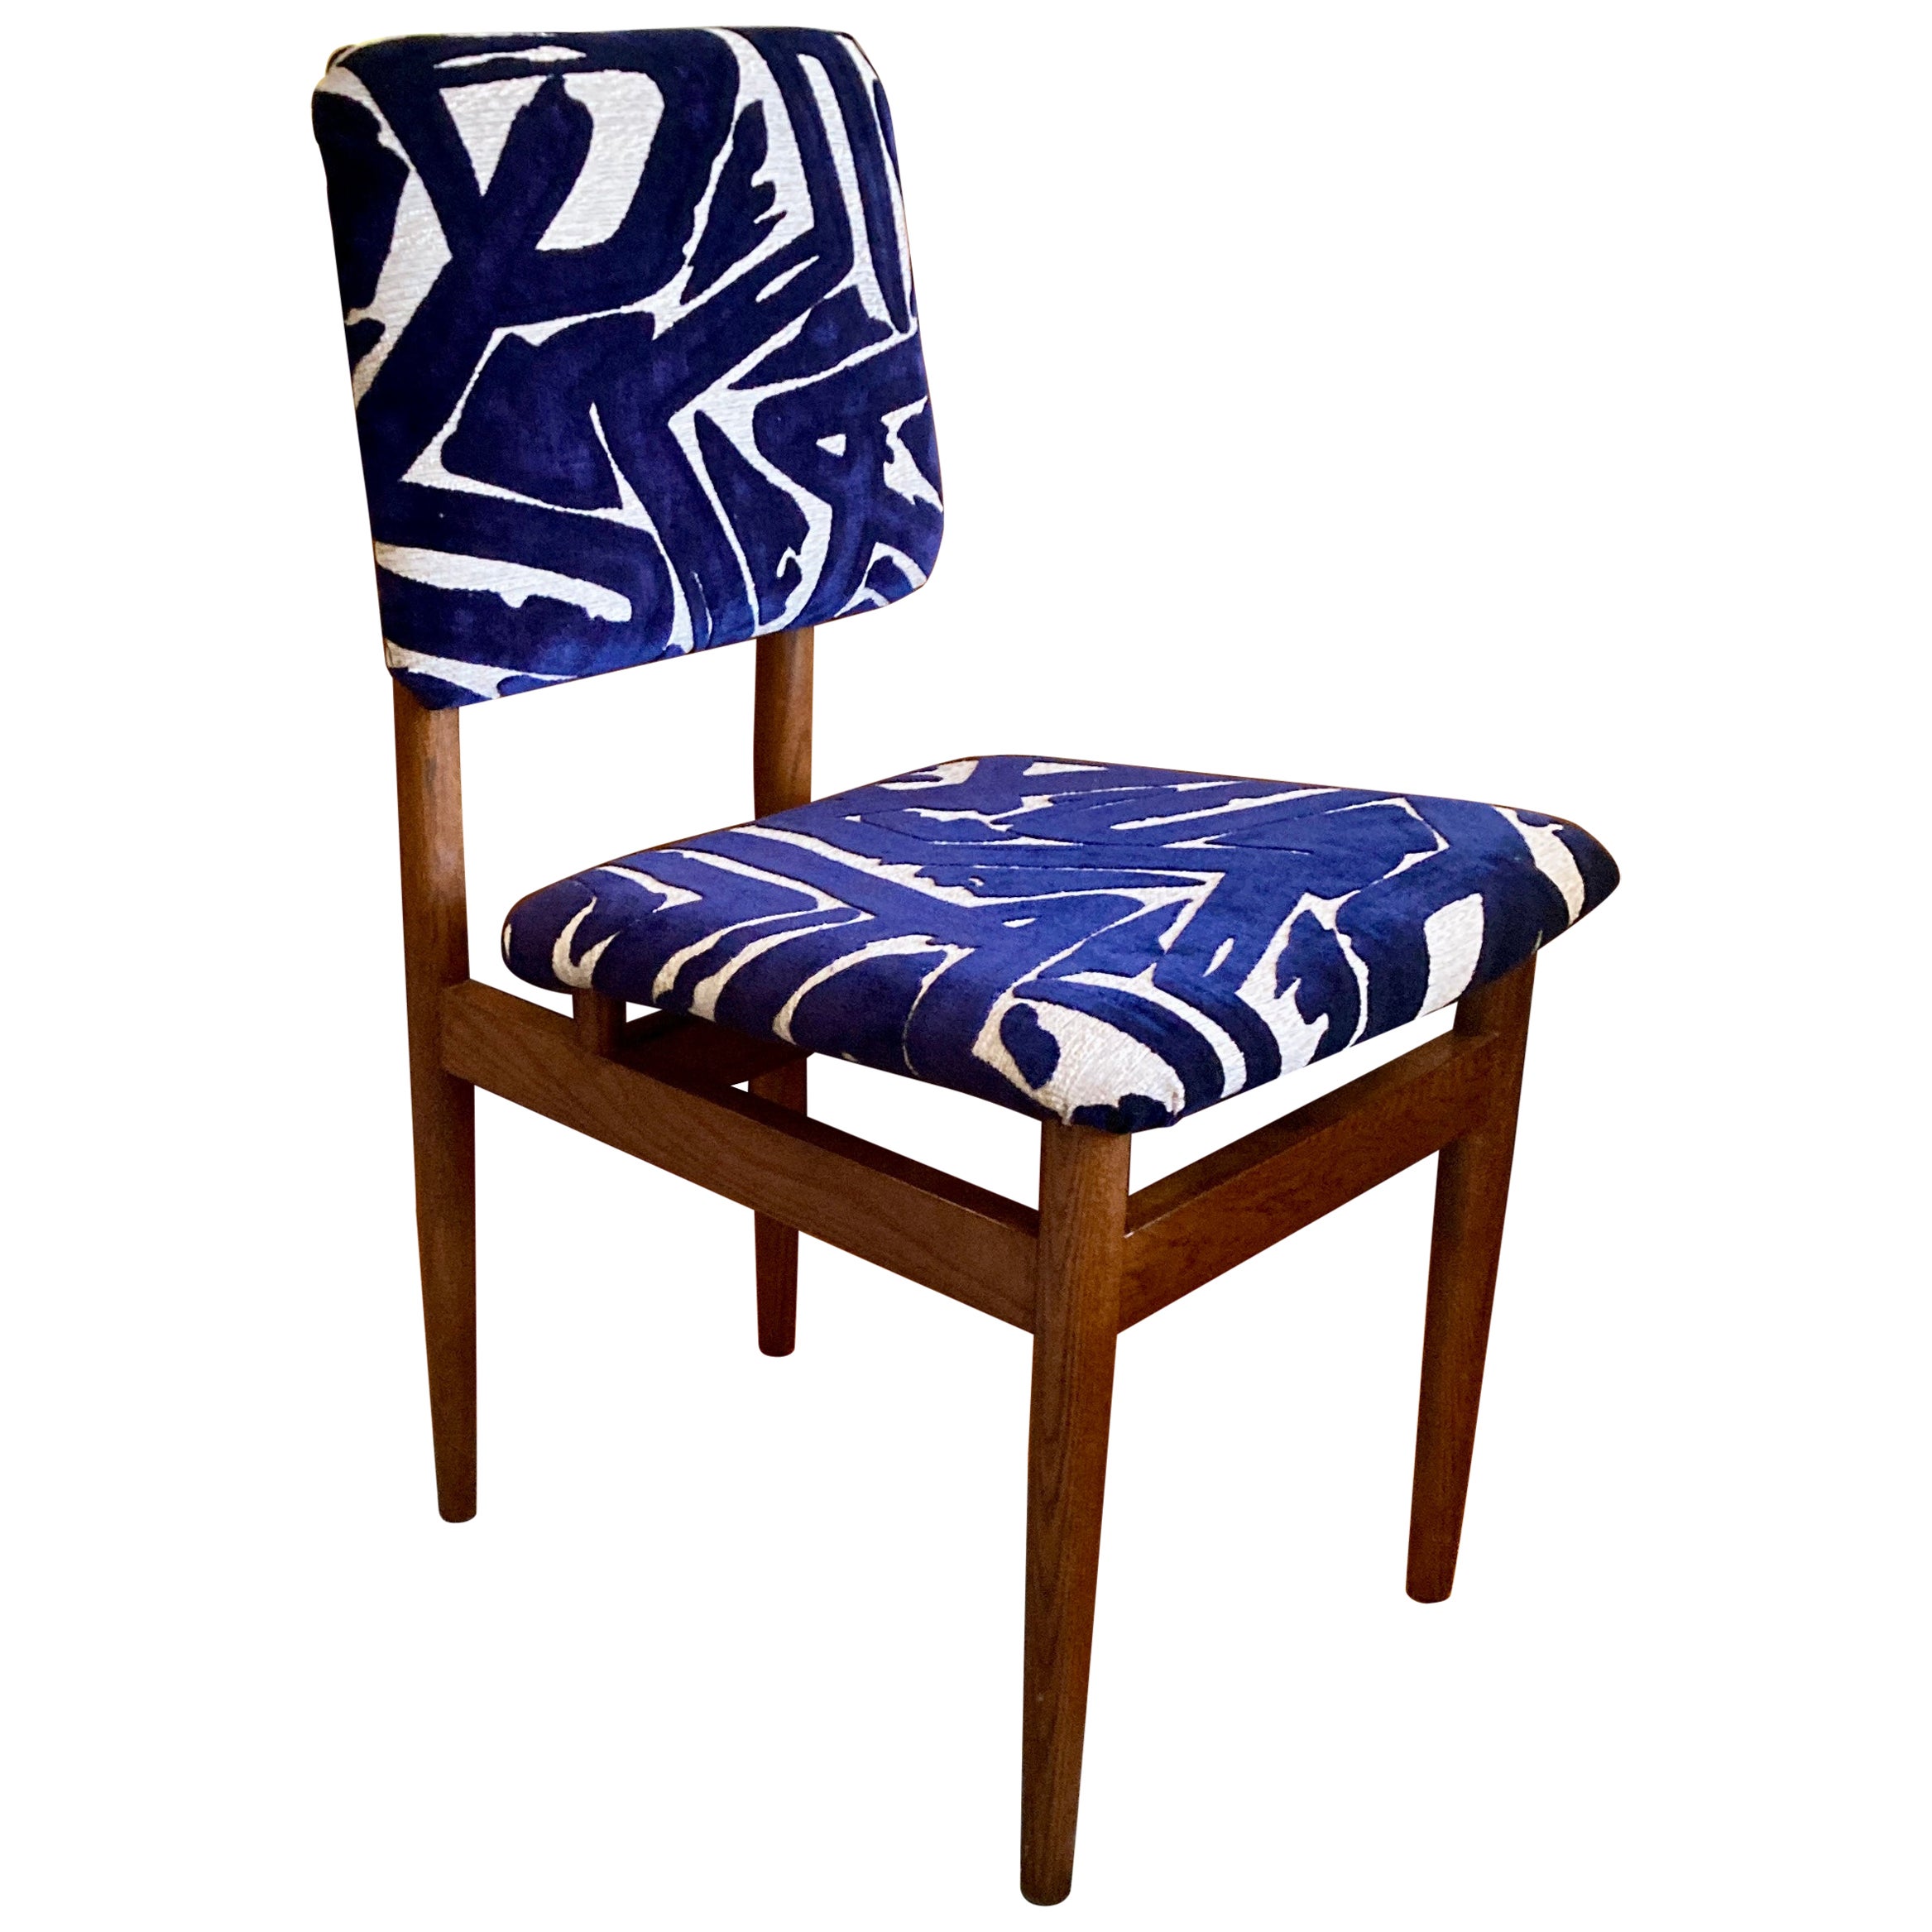 Arne Vodder Style Midcentury Chair Reupholstered in Abstract Blue and Ecru